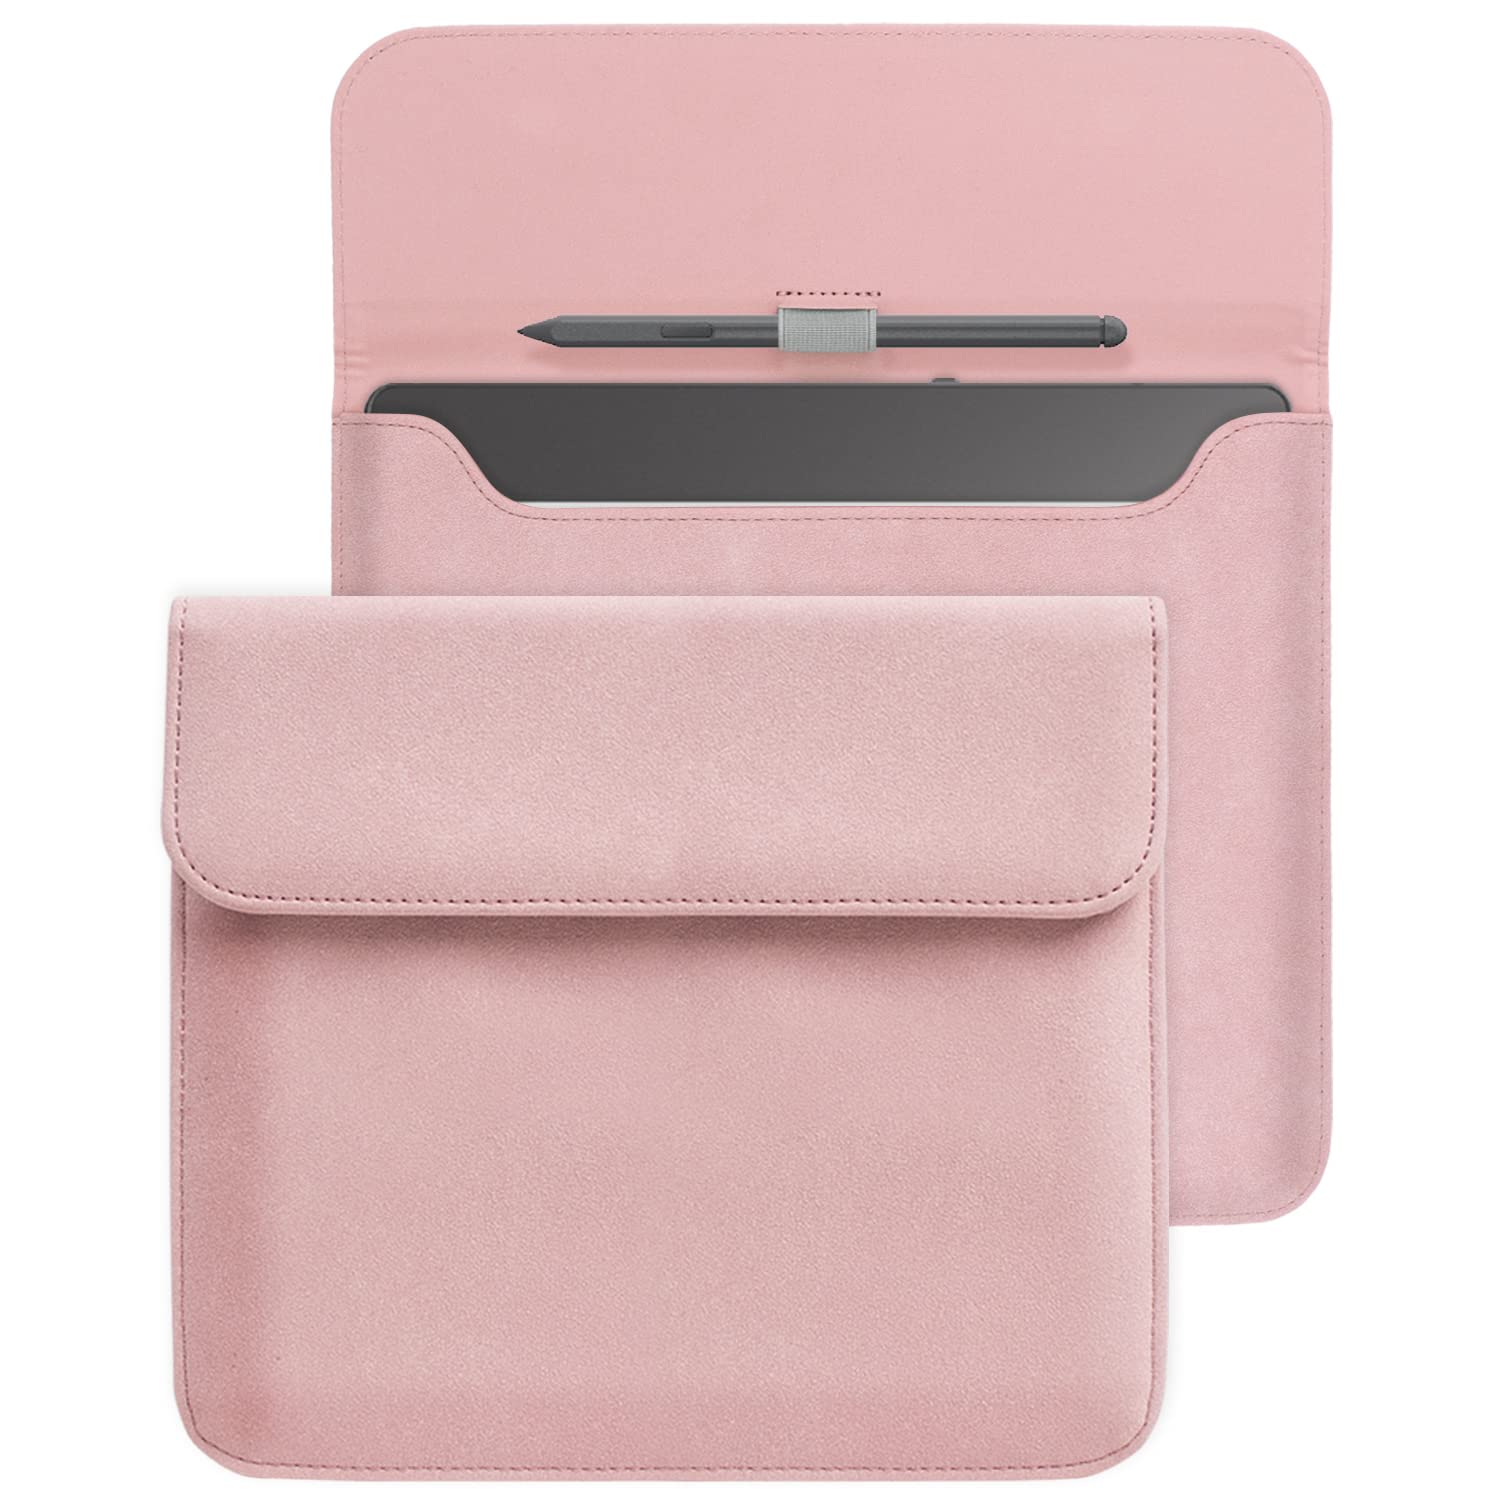 WALNEW Sleeve Case for 10.2-inch Kindle Scribe (2022 Released), Protective Pouch Bag Case Cover with Pen Holder for 10.2” Amazon Kindle Scribe E-Reader (Pink)